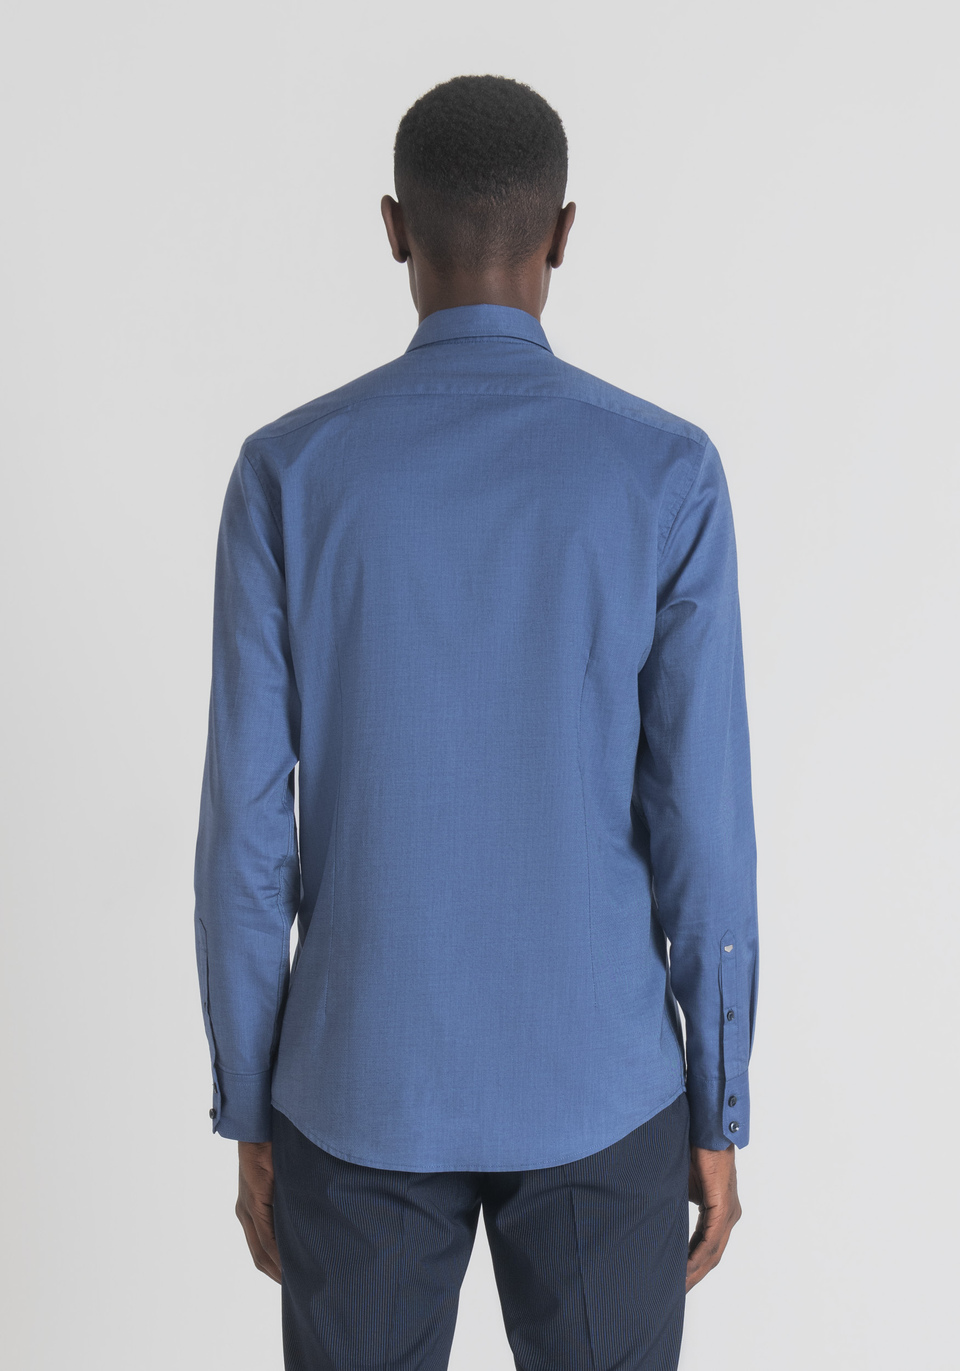 "NAPOLI" SLIM-FIT SHIRT IN EASY-IRON PURE COTTON WITH DENIM EFFECT - Antony Morato Online Shop